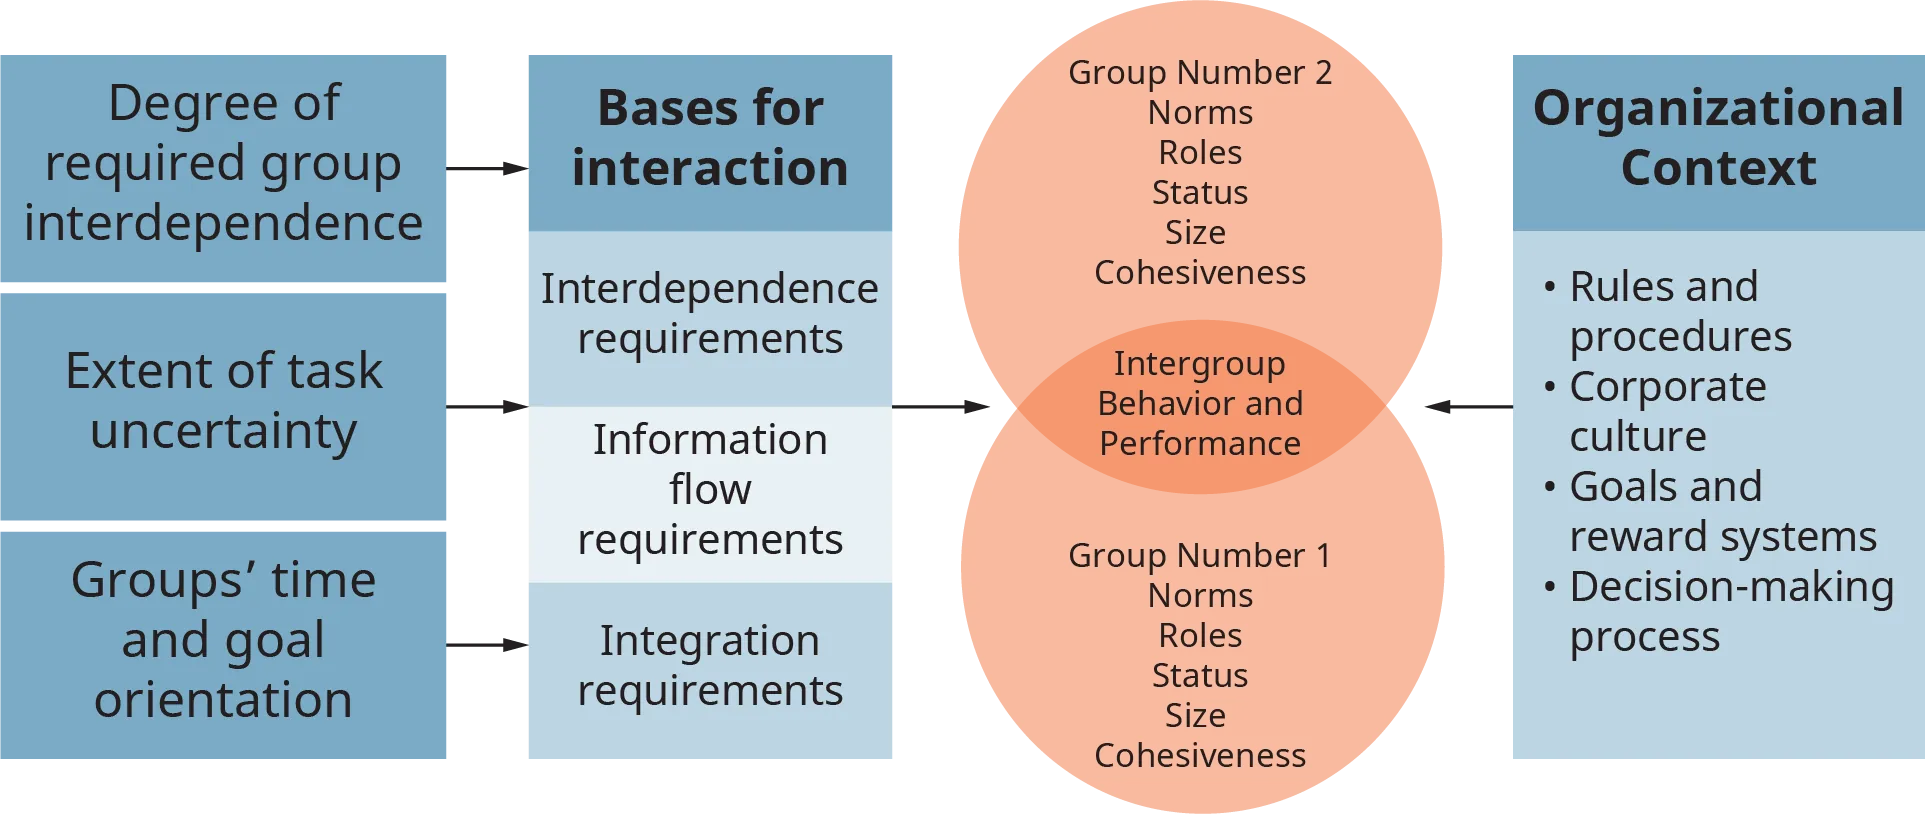 A diagram illustrates the model of intergroup behavior and performance.